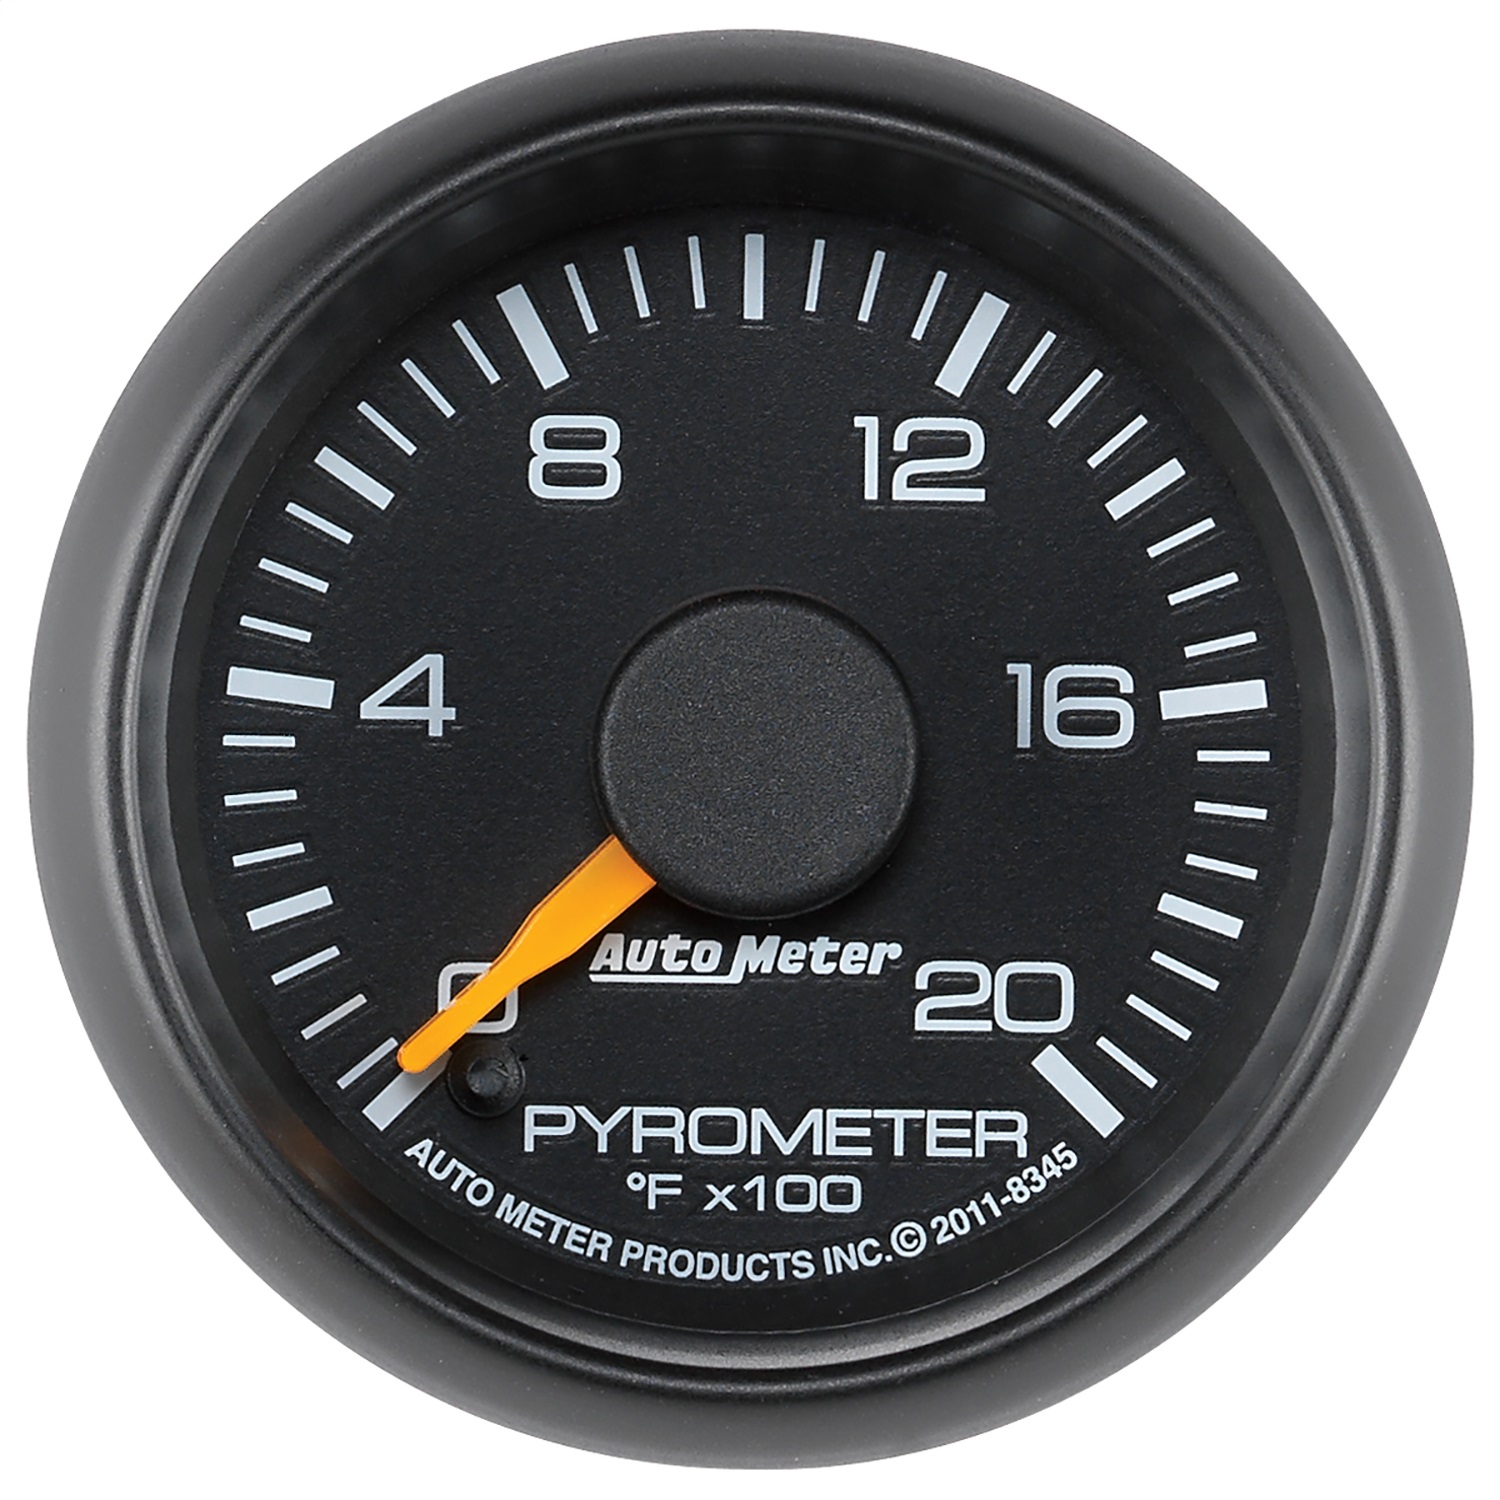 Auto Meter Auto Meter 8345 Chevy Factory Match; Electric Pyrometer Gauge Kit